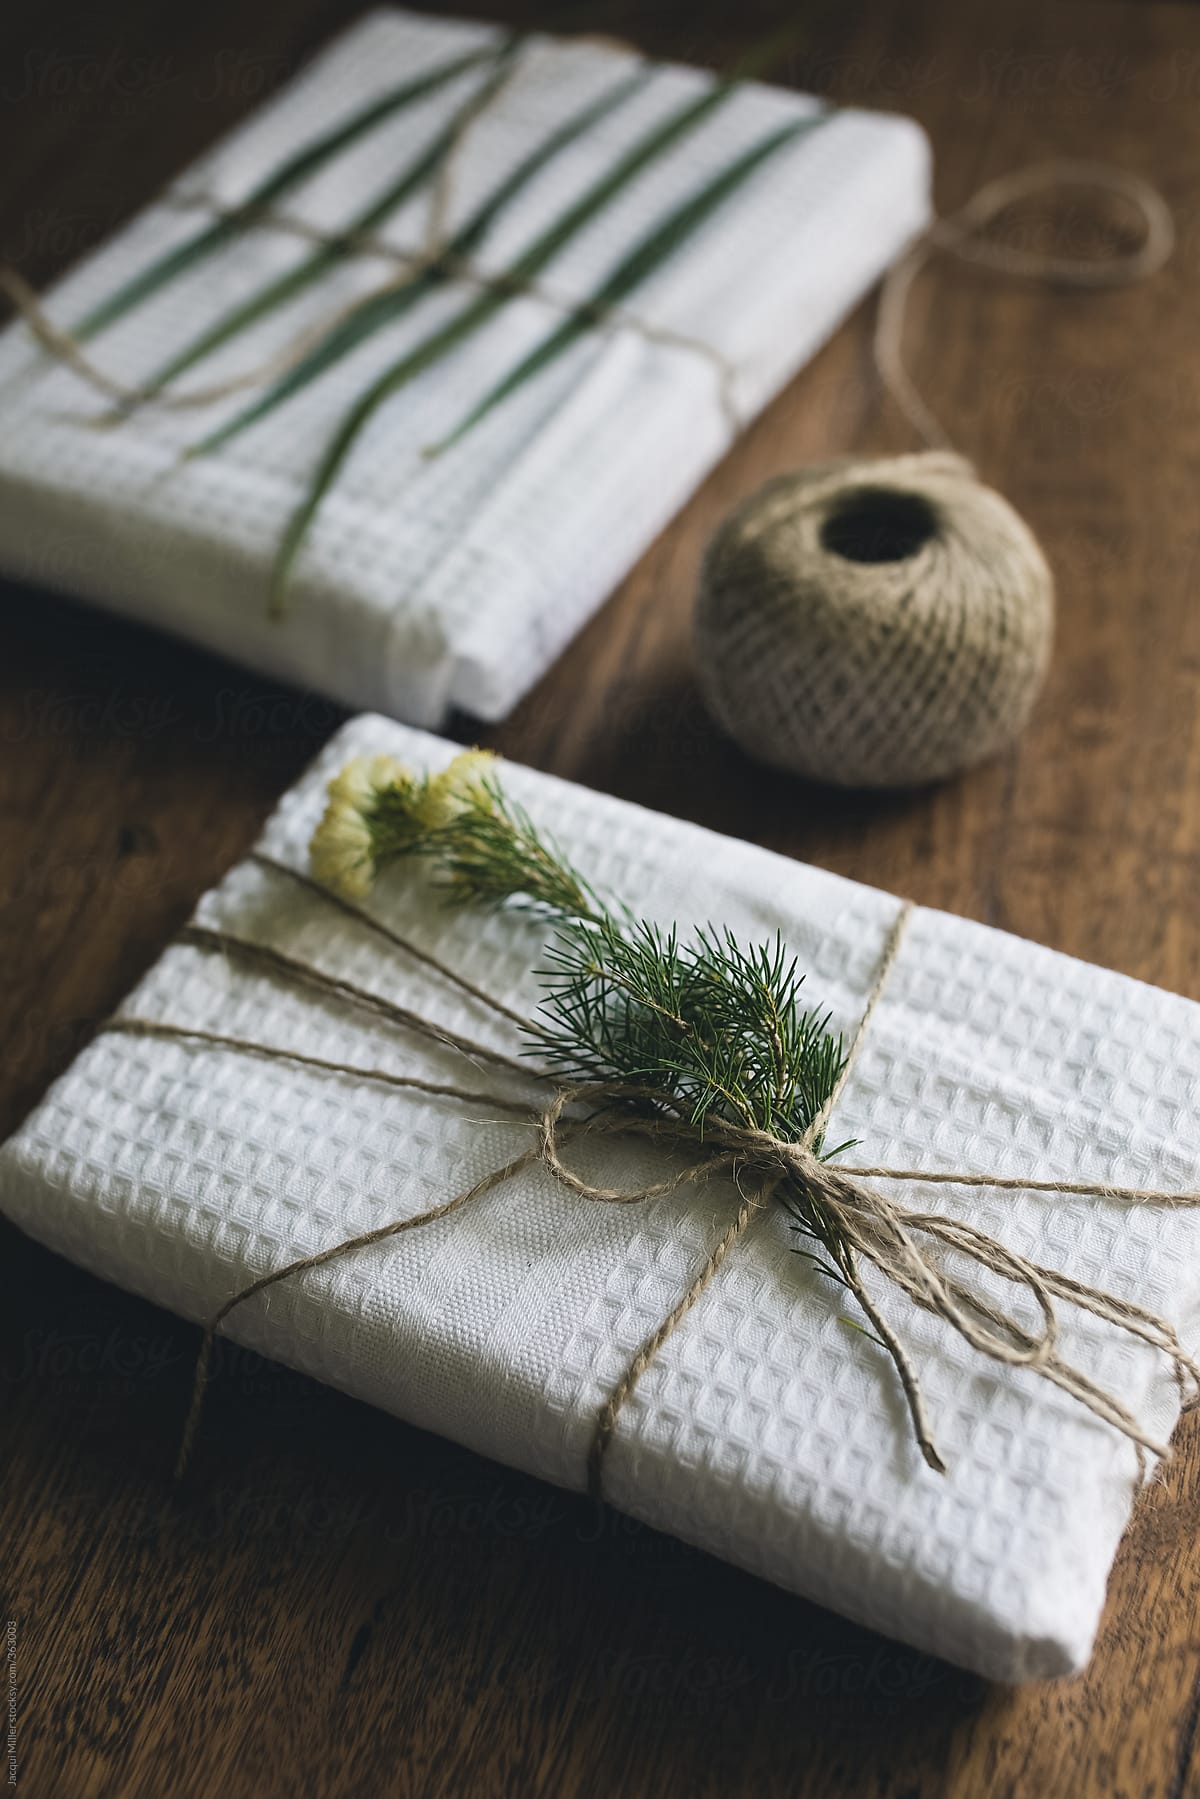 Gifts wrapped in reusable dish towel, decorated with native plants and garden twine